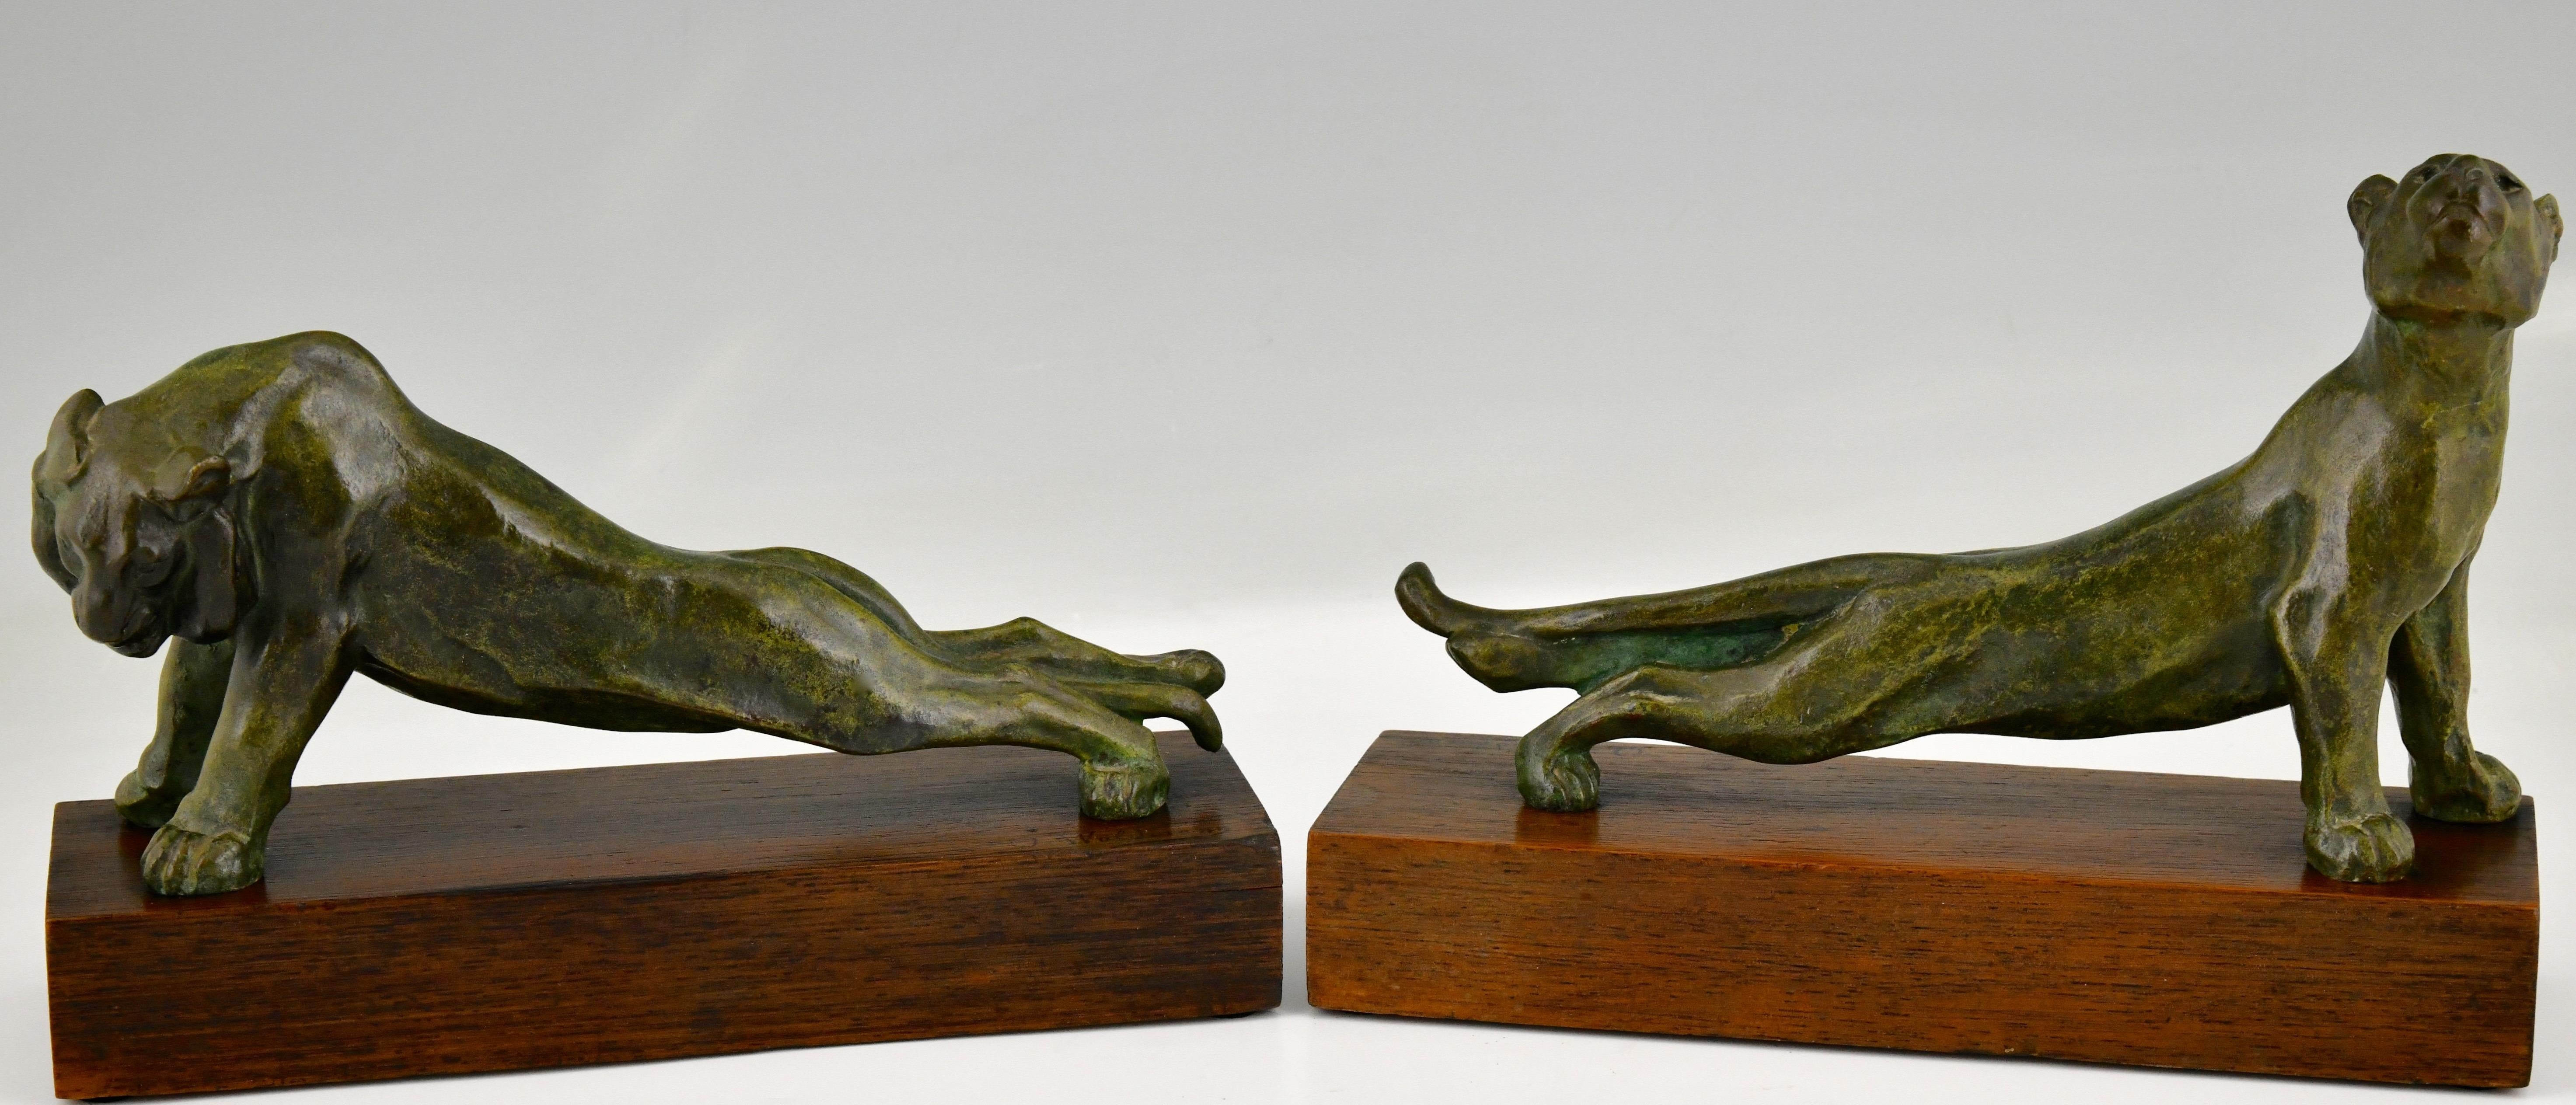 Early 20th Century Art Deco Bronze Bookends Panther and Tiger by Oscar Waldmann, 1925 For Sale